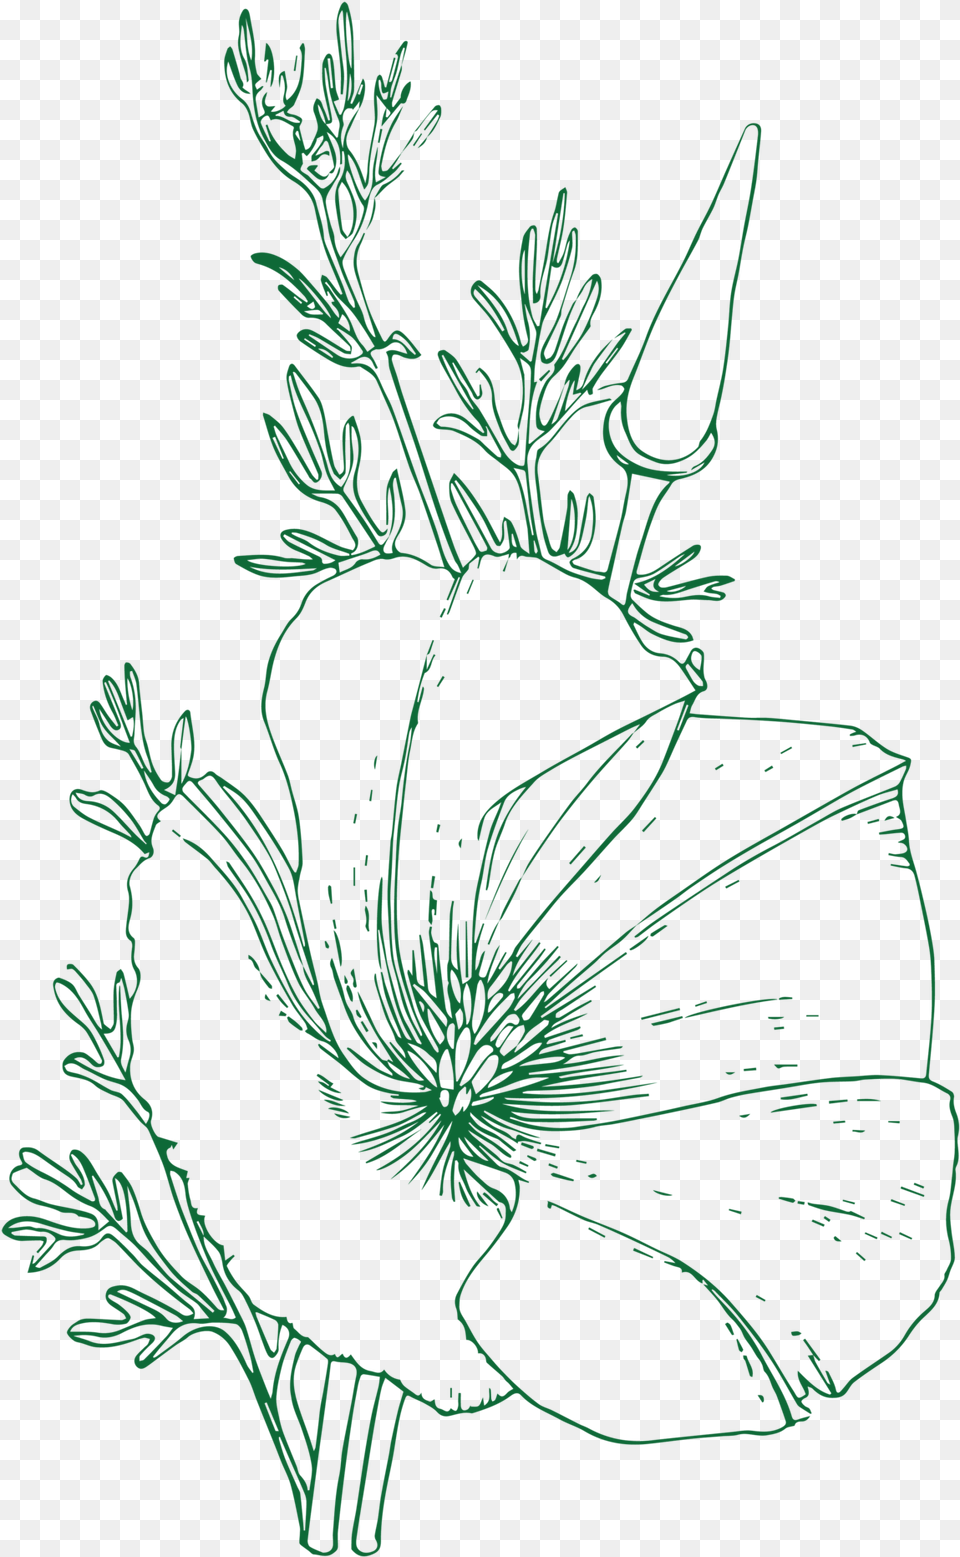 Poppies Have Four Petals Often Crinkled Resembling Sketch, Plant, Art, Graphics, Flower Png